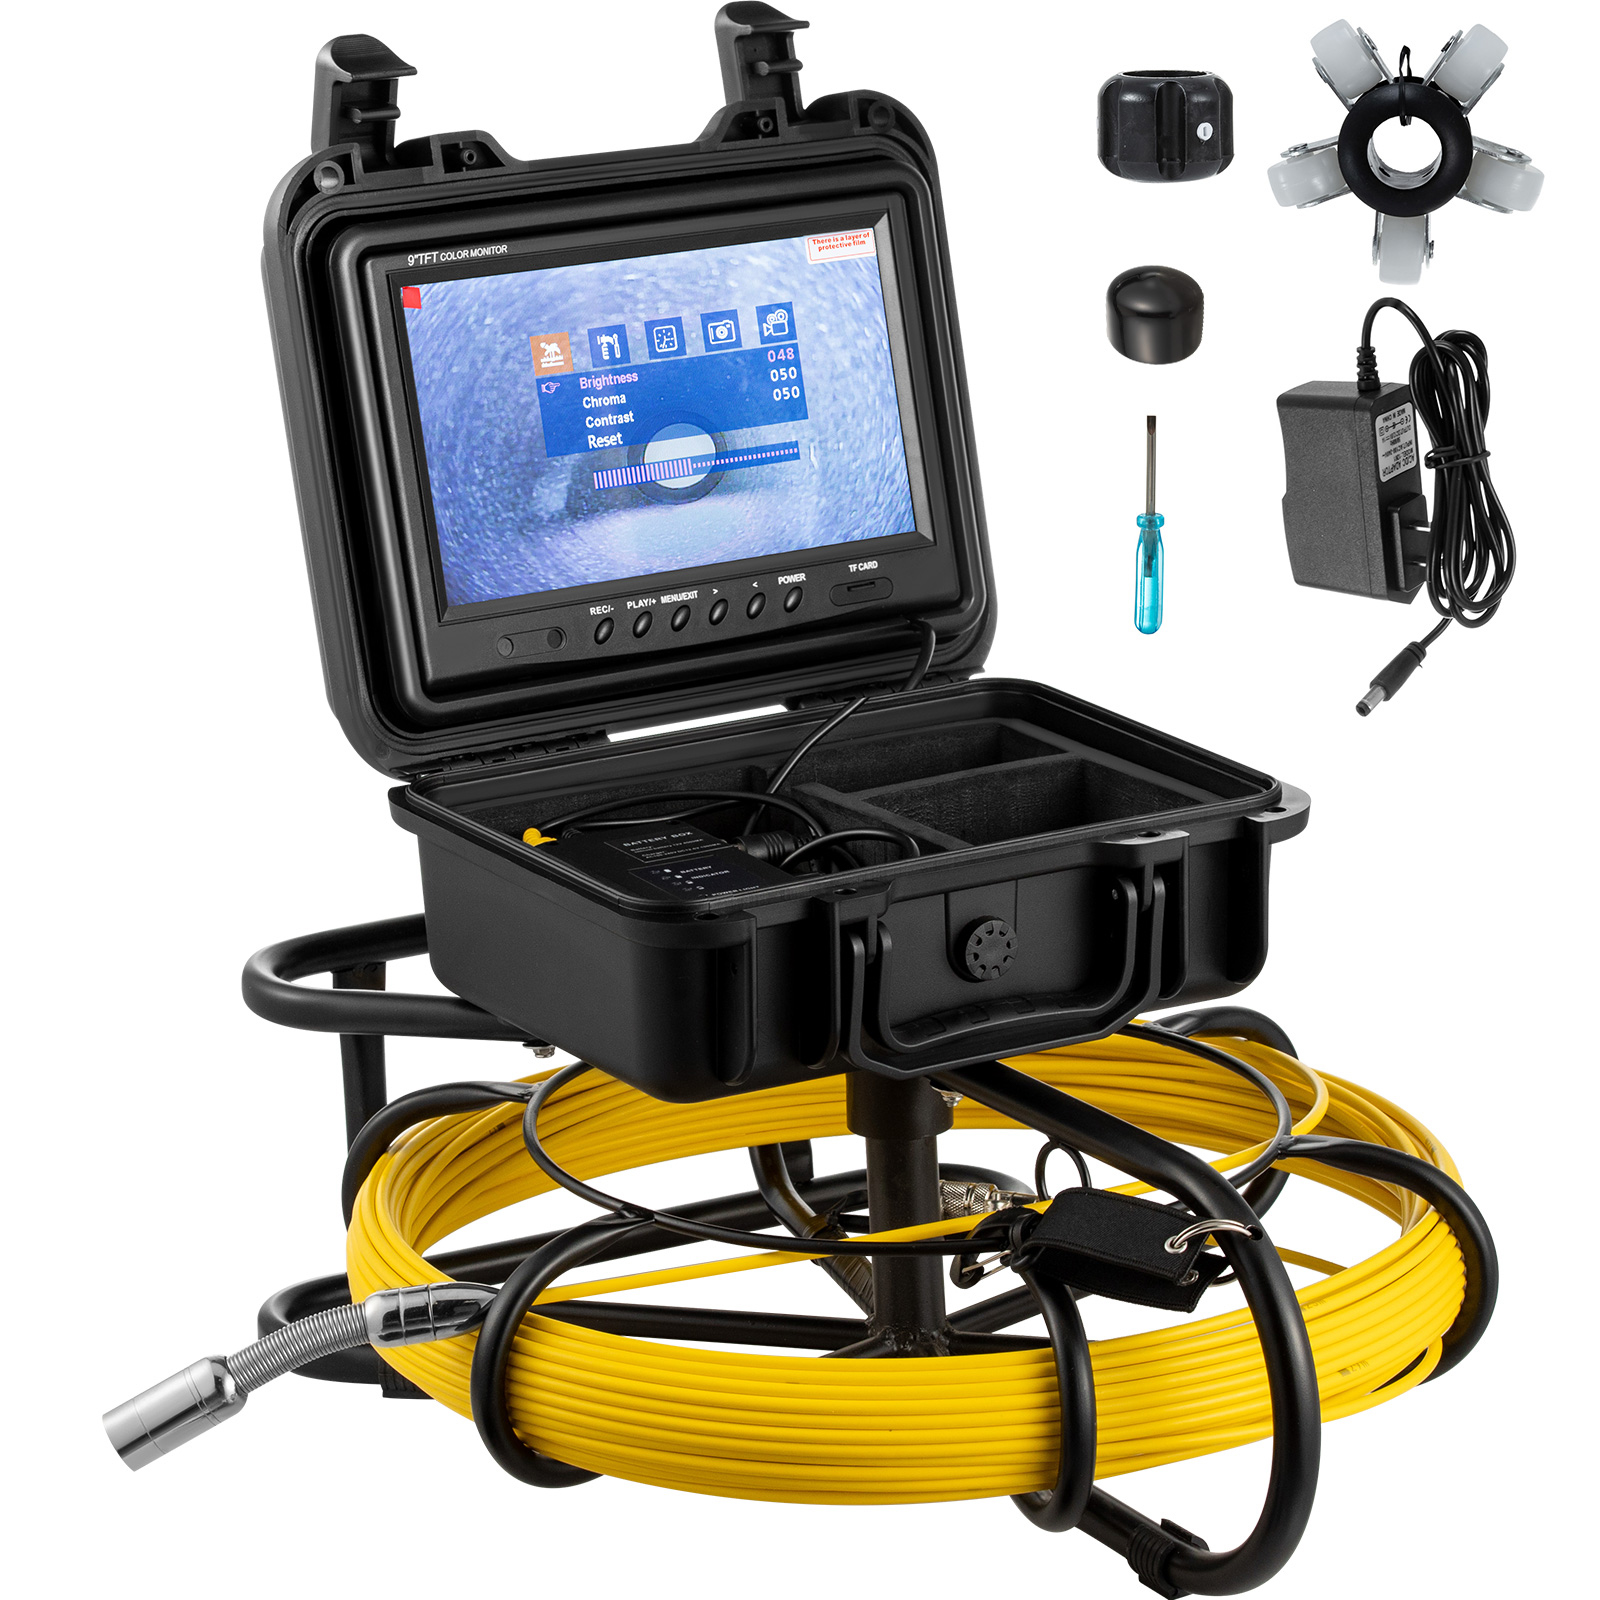 30M Waterproof Drain Pipe Sewer Inspection Camera System 9" LCD 1000 TVL Camera 